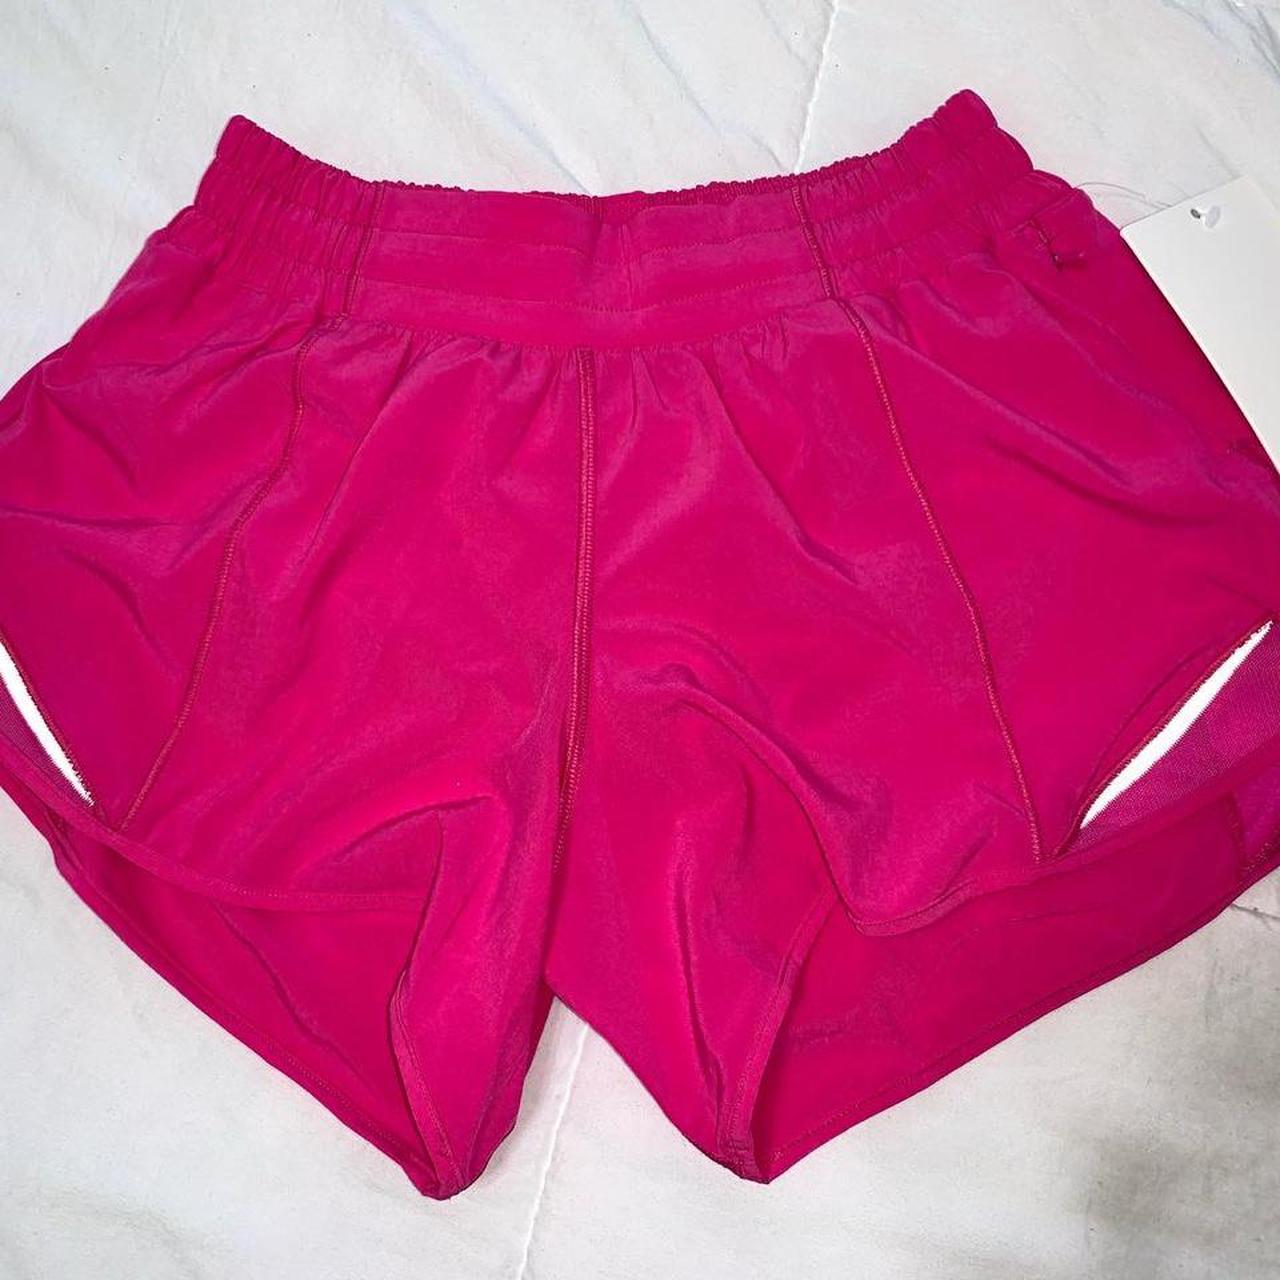 NWT LULULEMON HOTTY Hot HR High-Rise Short 4” Sonic Pink Size 6 $68.00 -  PicClick